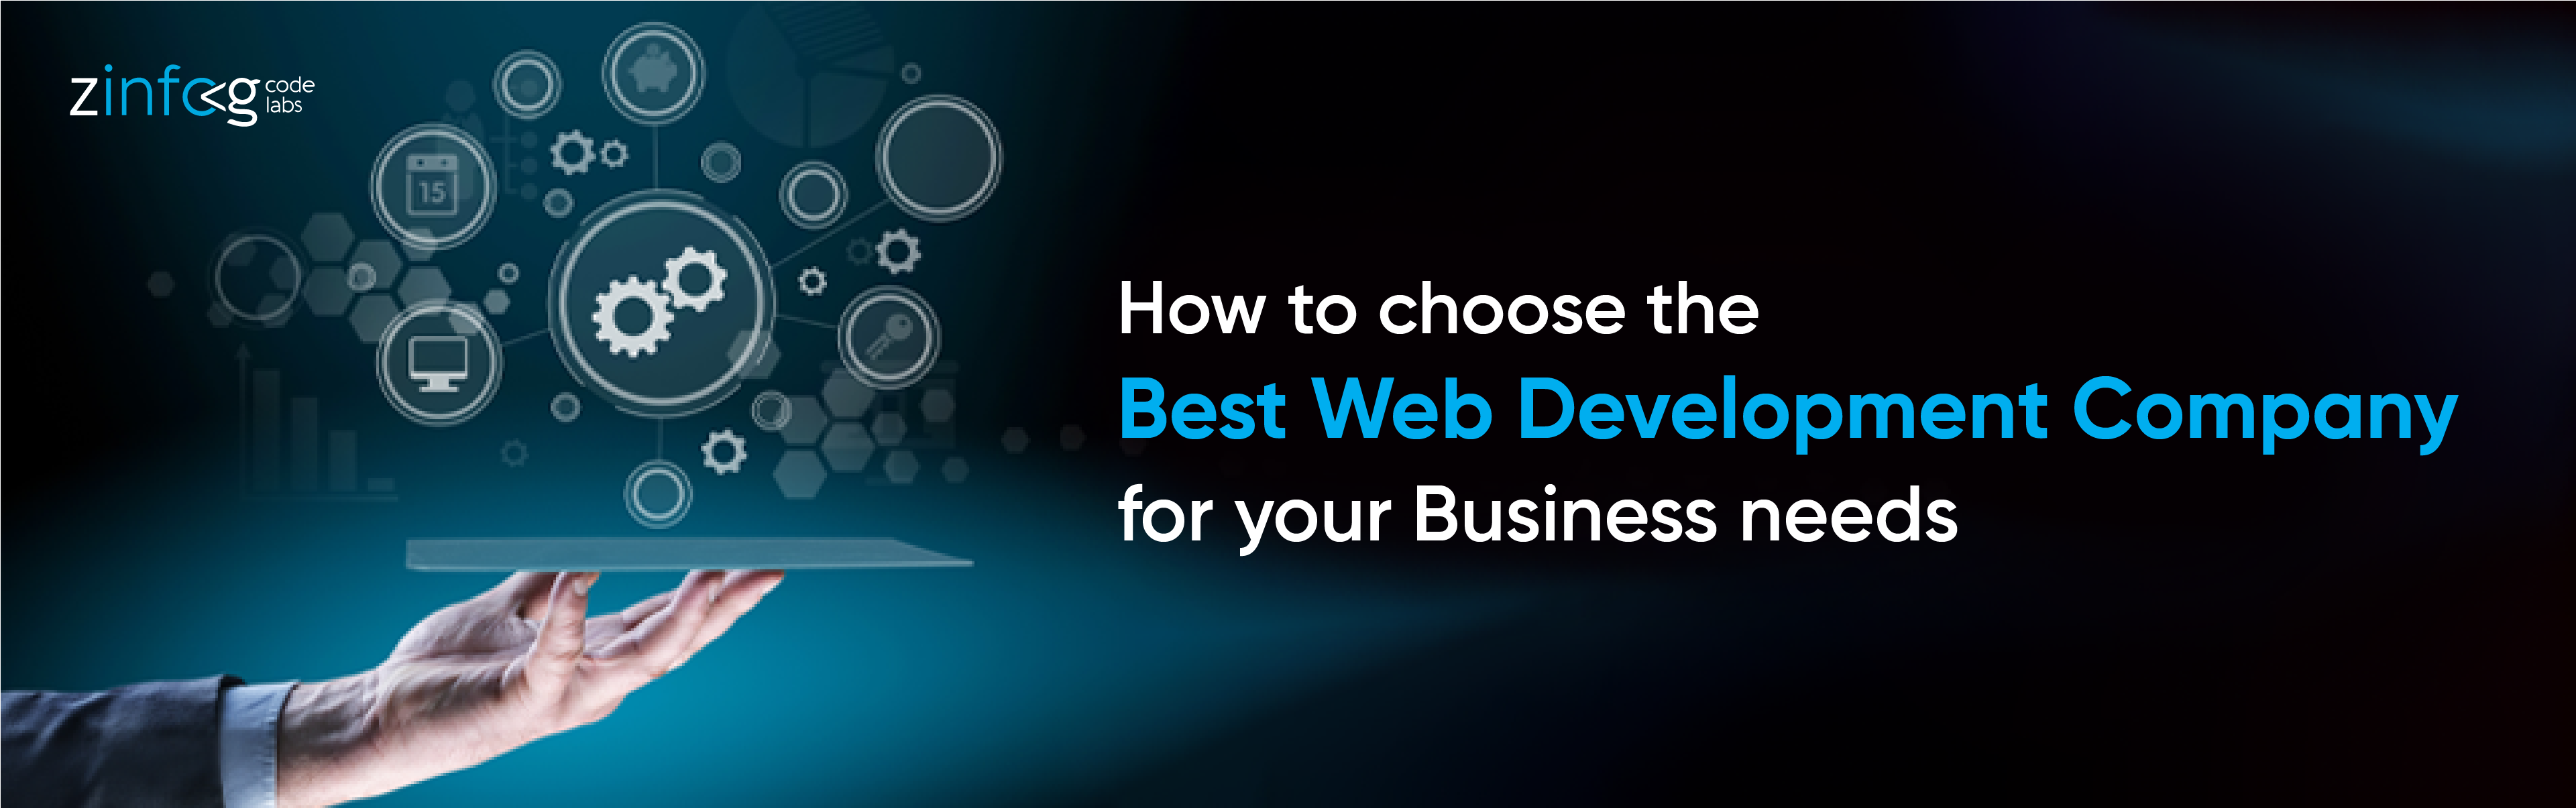 how-to-choose-the-best-web-development-company-for-your-business-needs.html